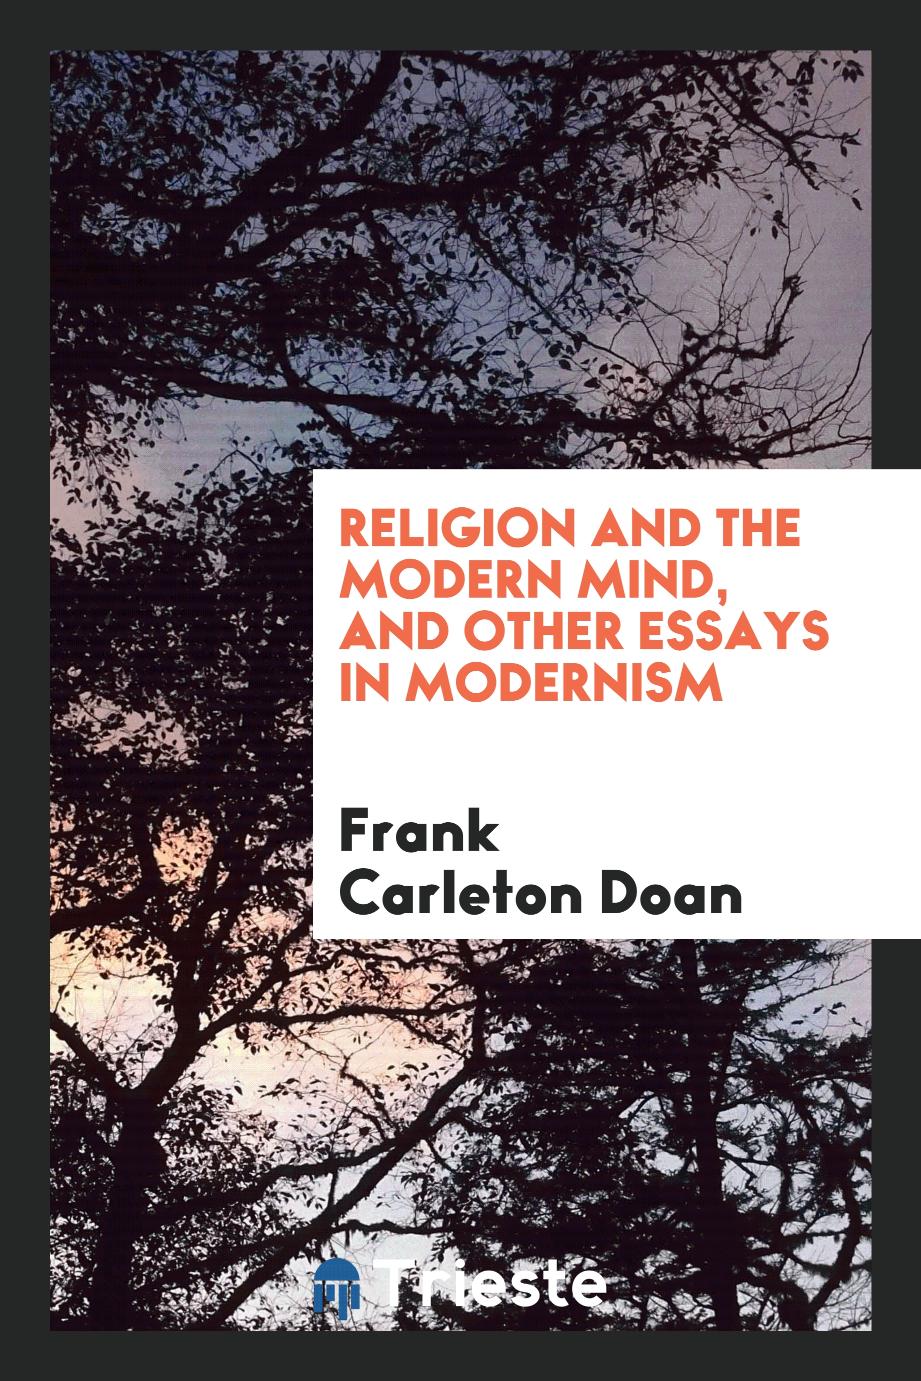 Religion and the modern mind, and other essays in modernism